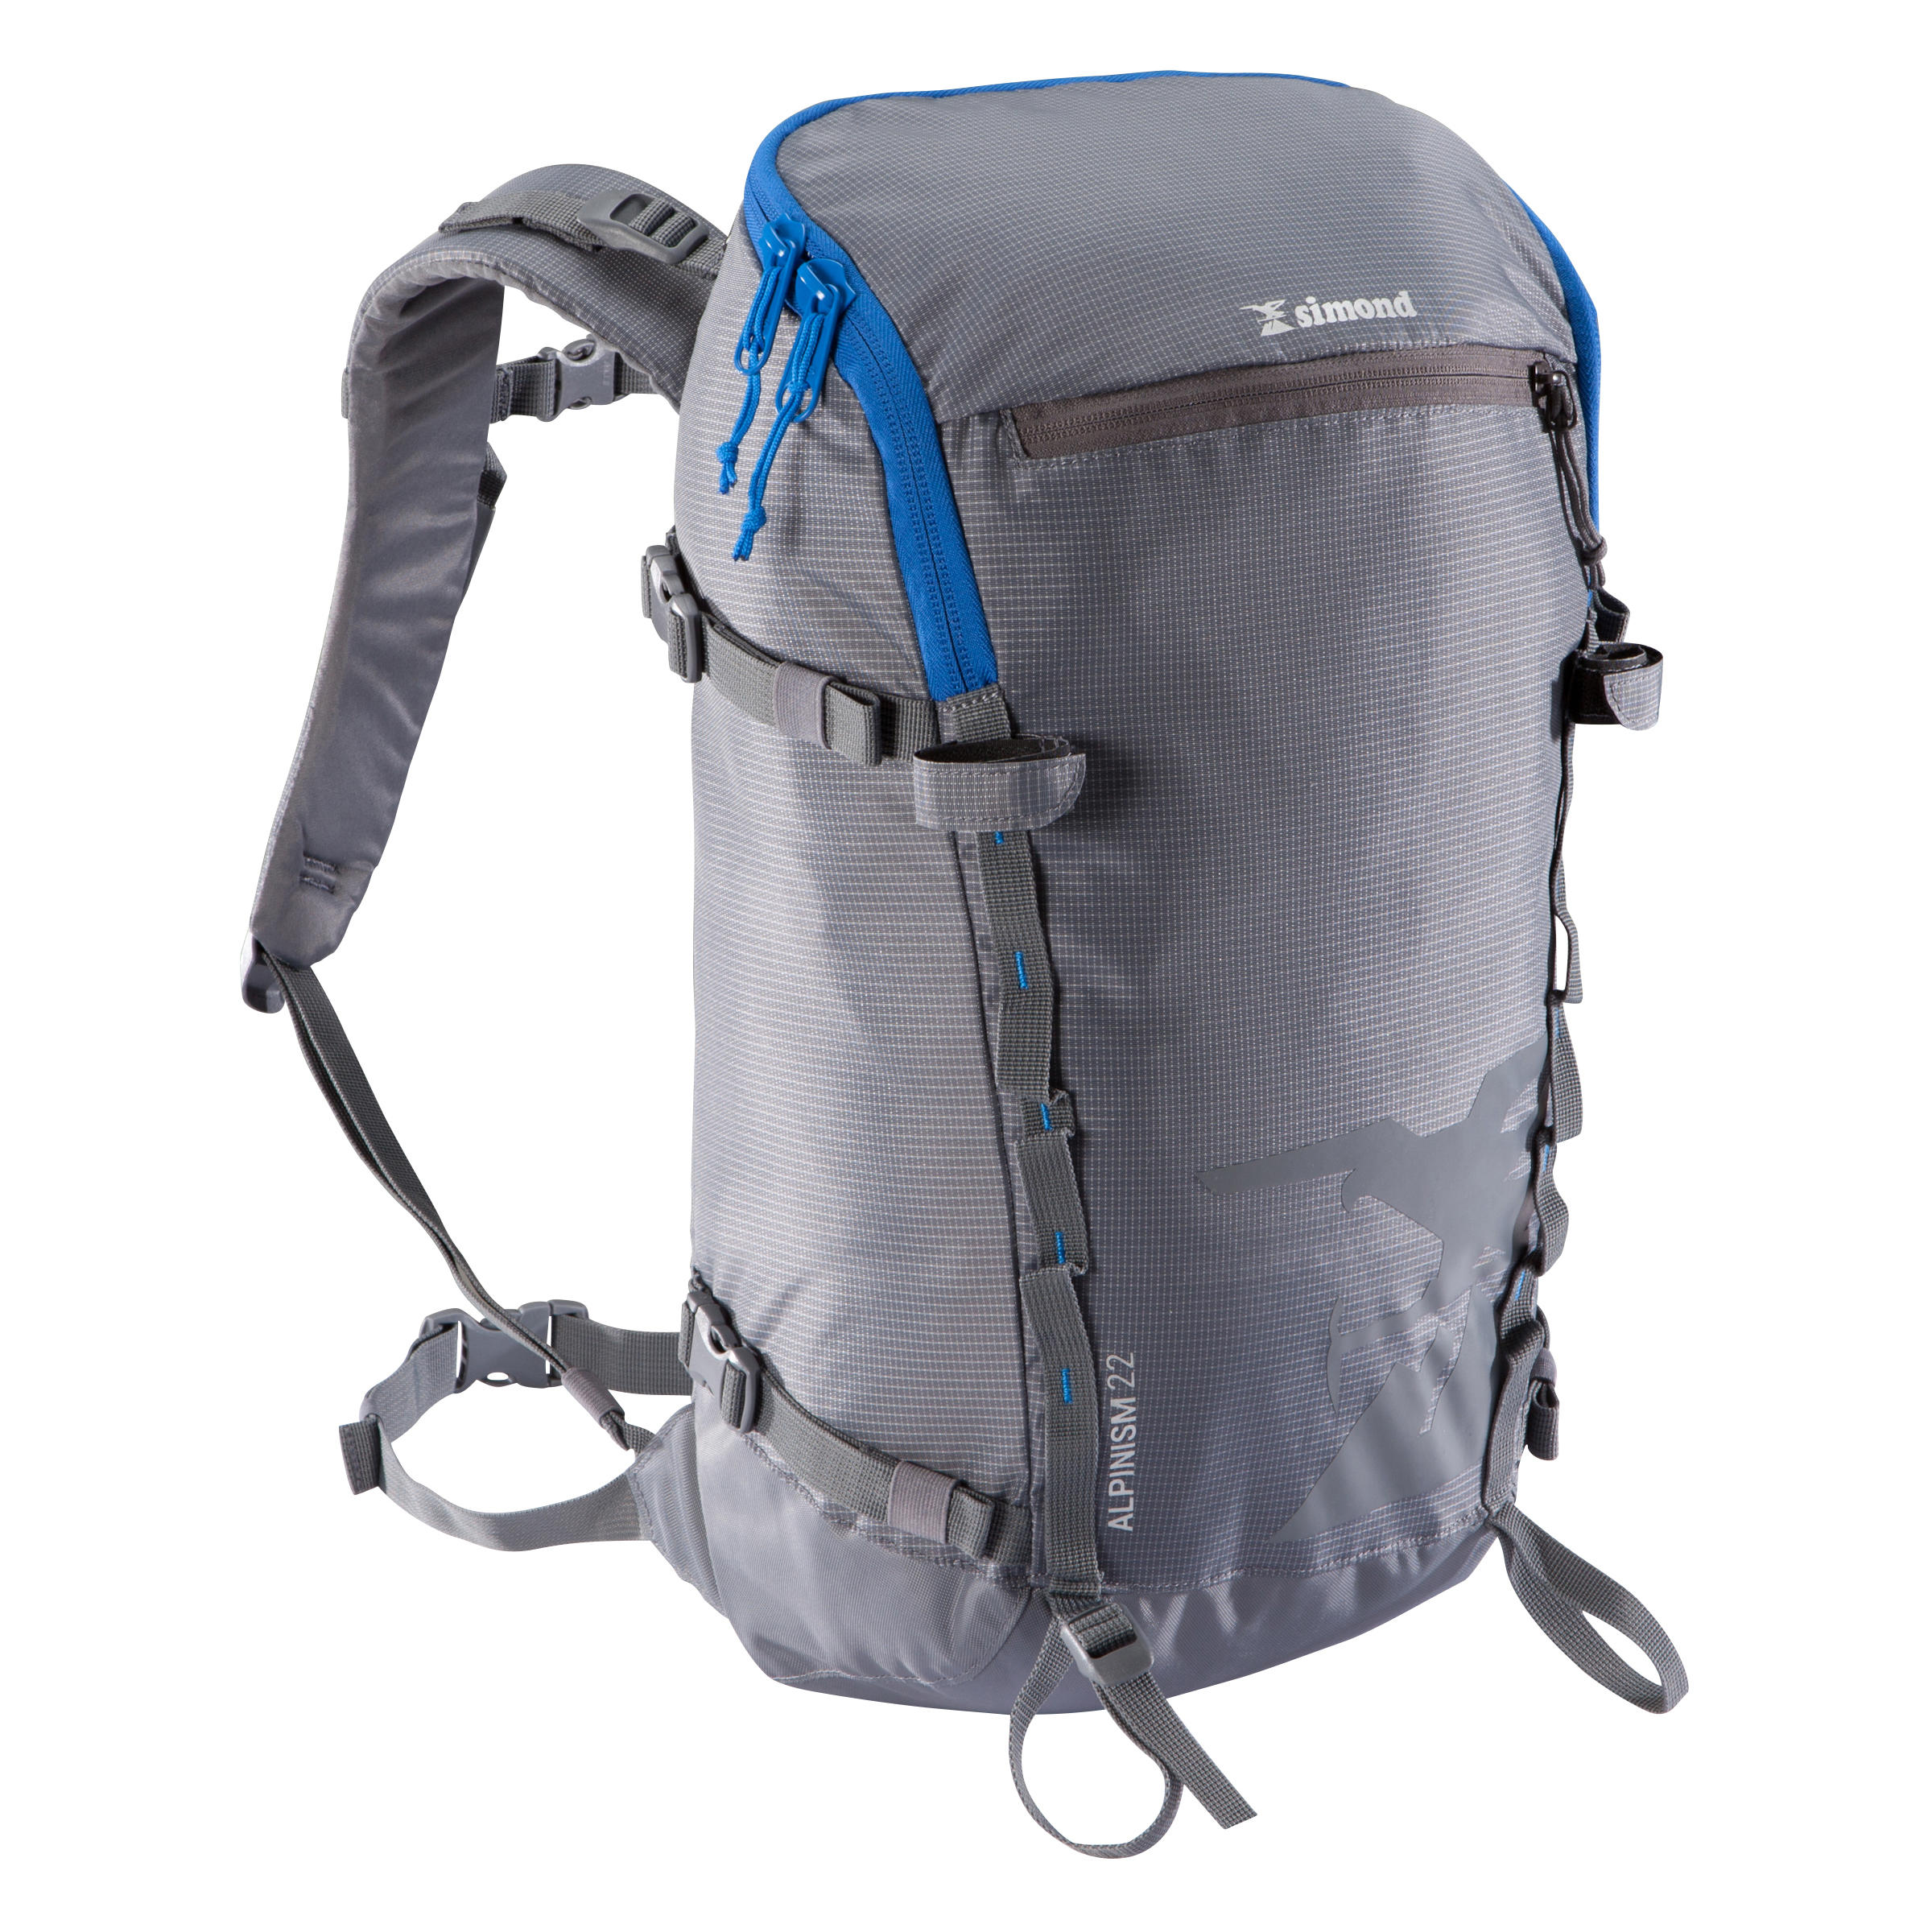 SIMOND Mountaineering Backpack 22 Litres - Alpinism 22 Grey